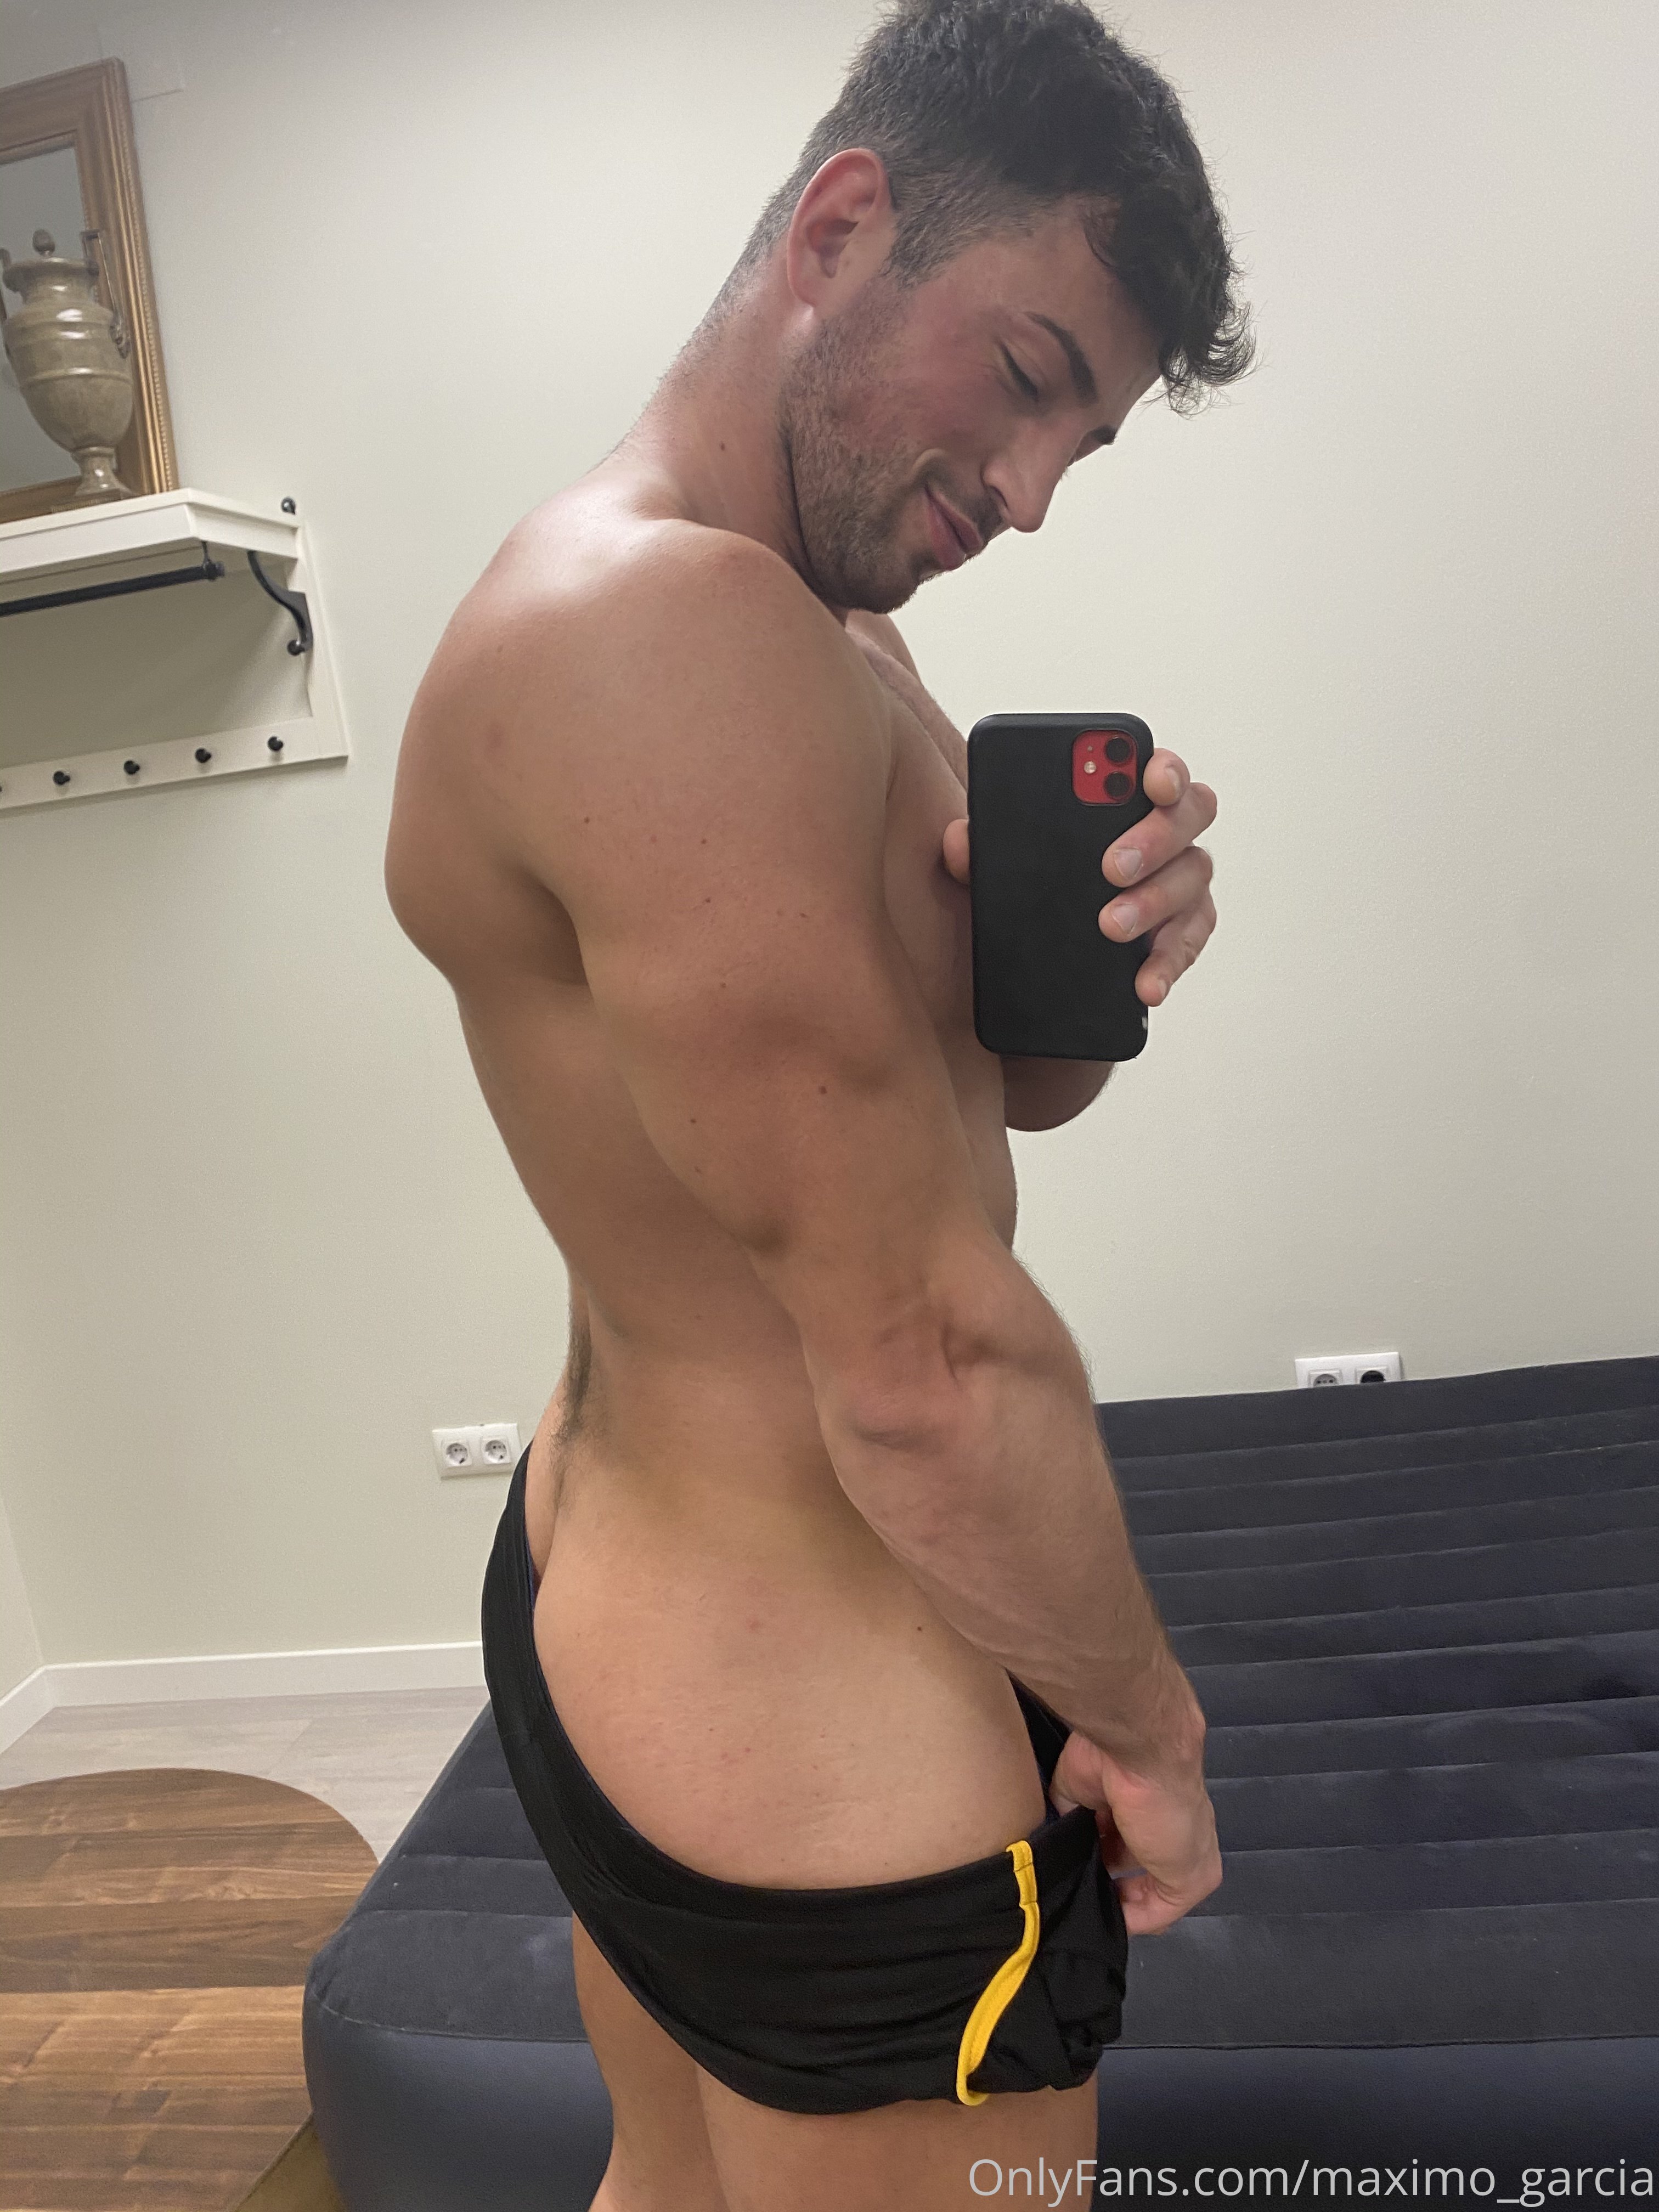 Maximo garcia onlyfans